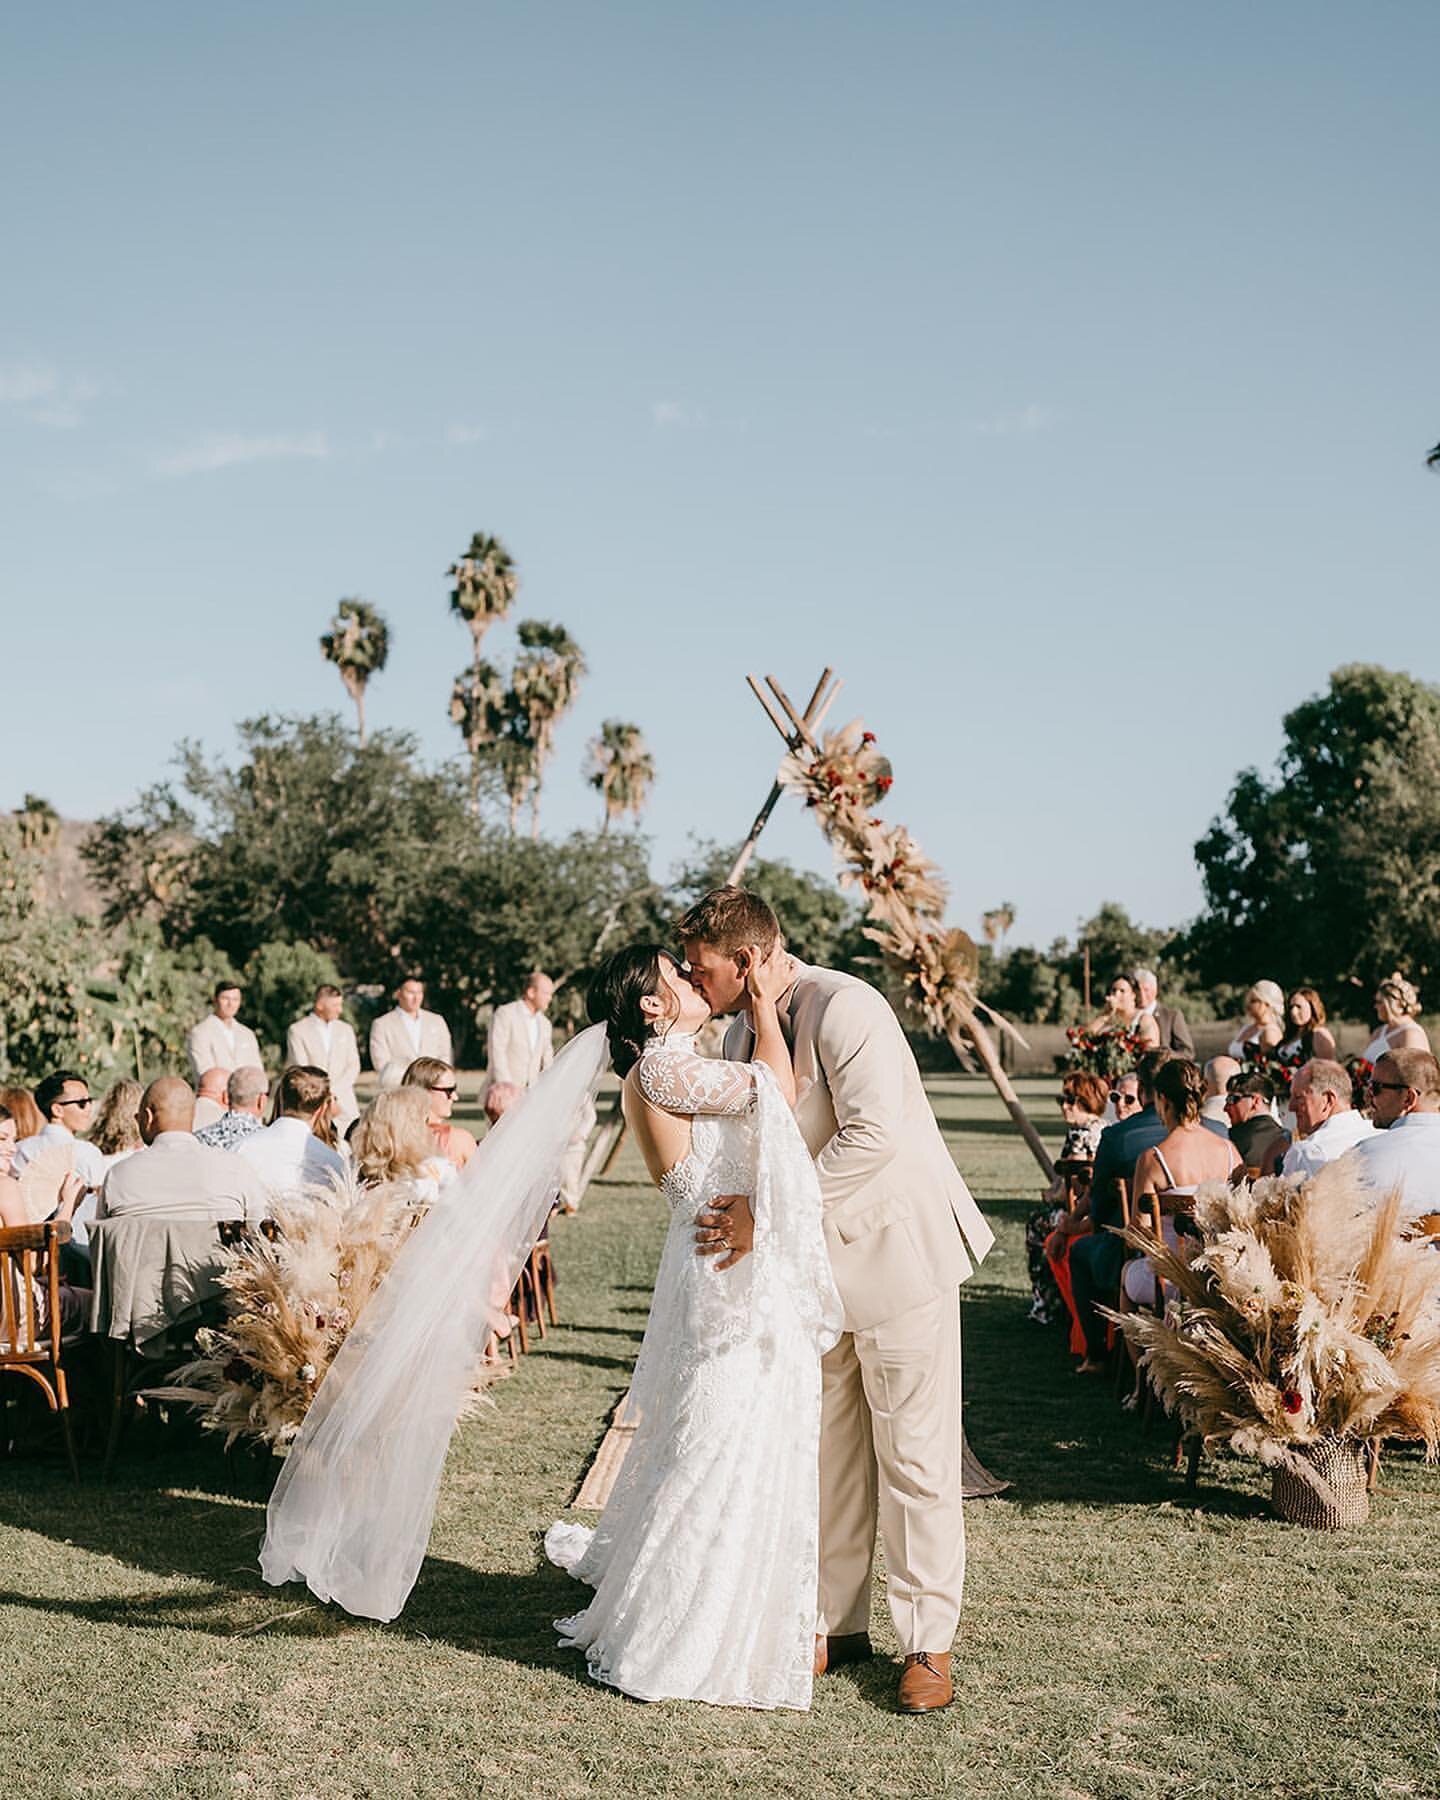 All the deserts vibes you need for a magical wedding day✨🌵 San Jos&eacute; del Cabo has become a favorite spot for couples looking for a relaxed, bohemian and romantic atmosphere and we can see why, isn&rsquo;t it beautiful? ✨🤍 #fridaenamoradaguide